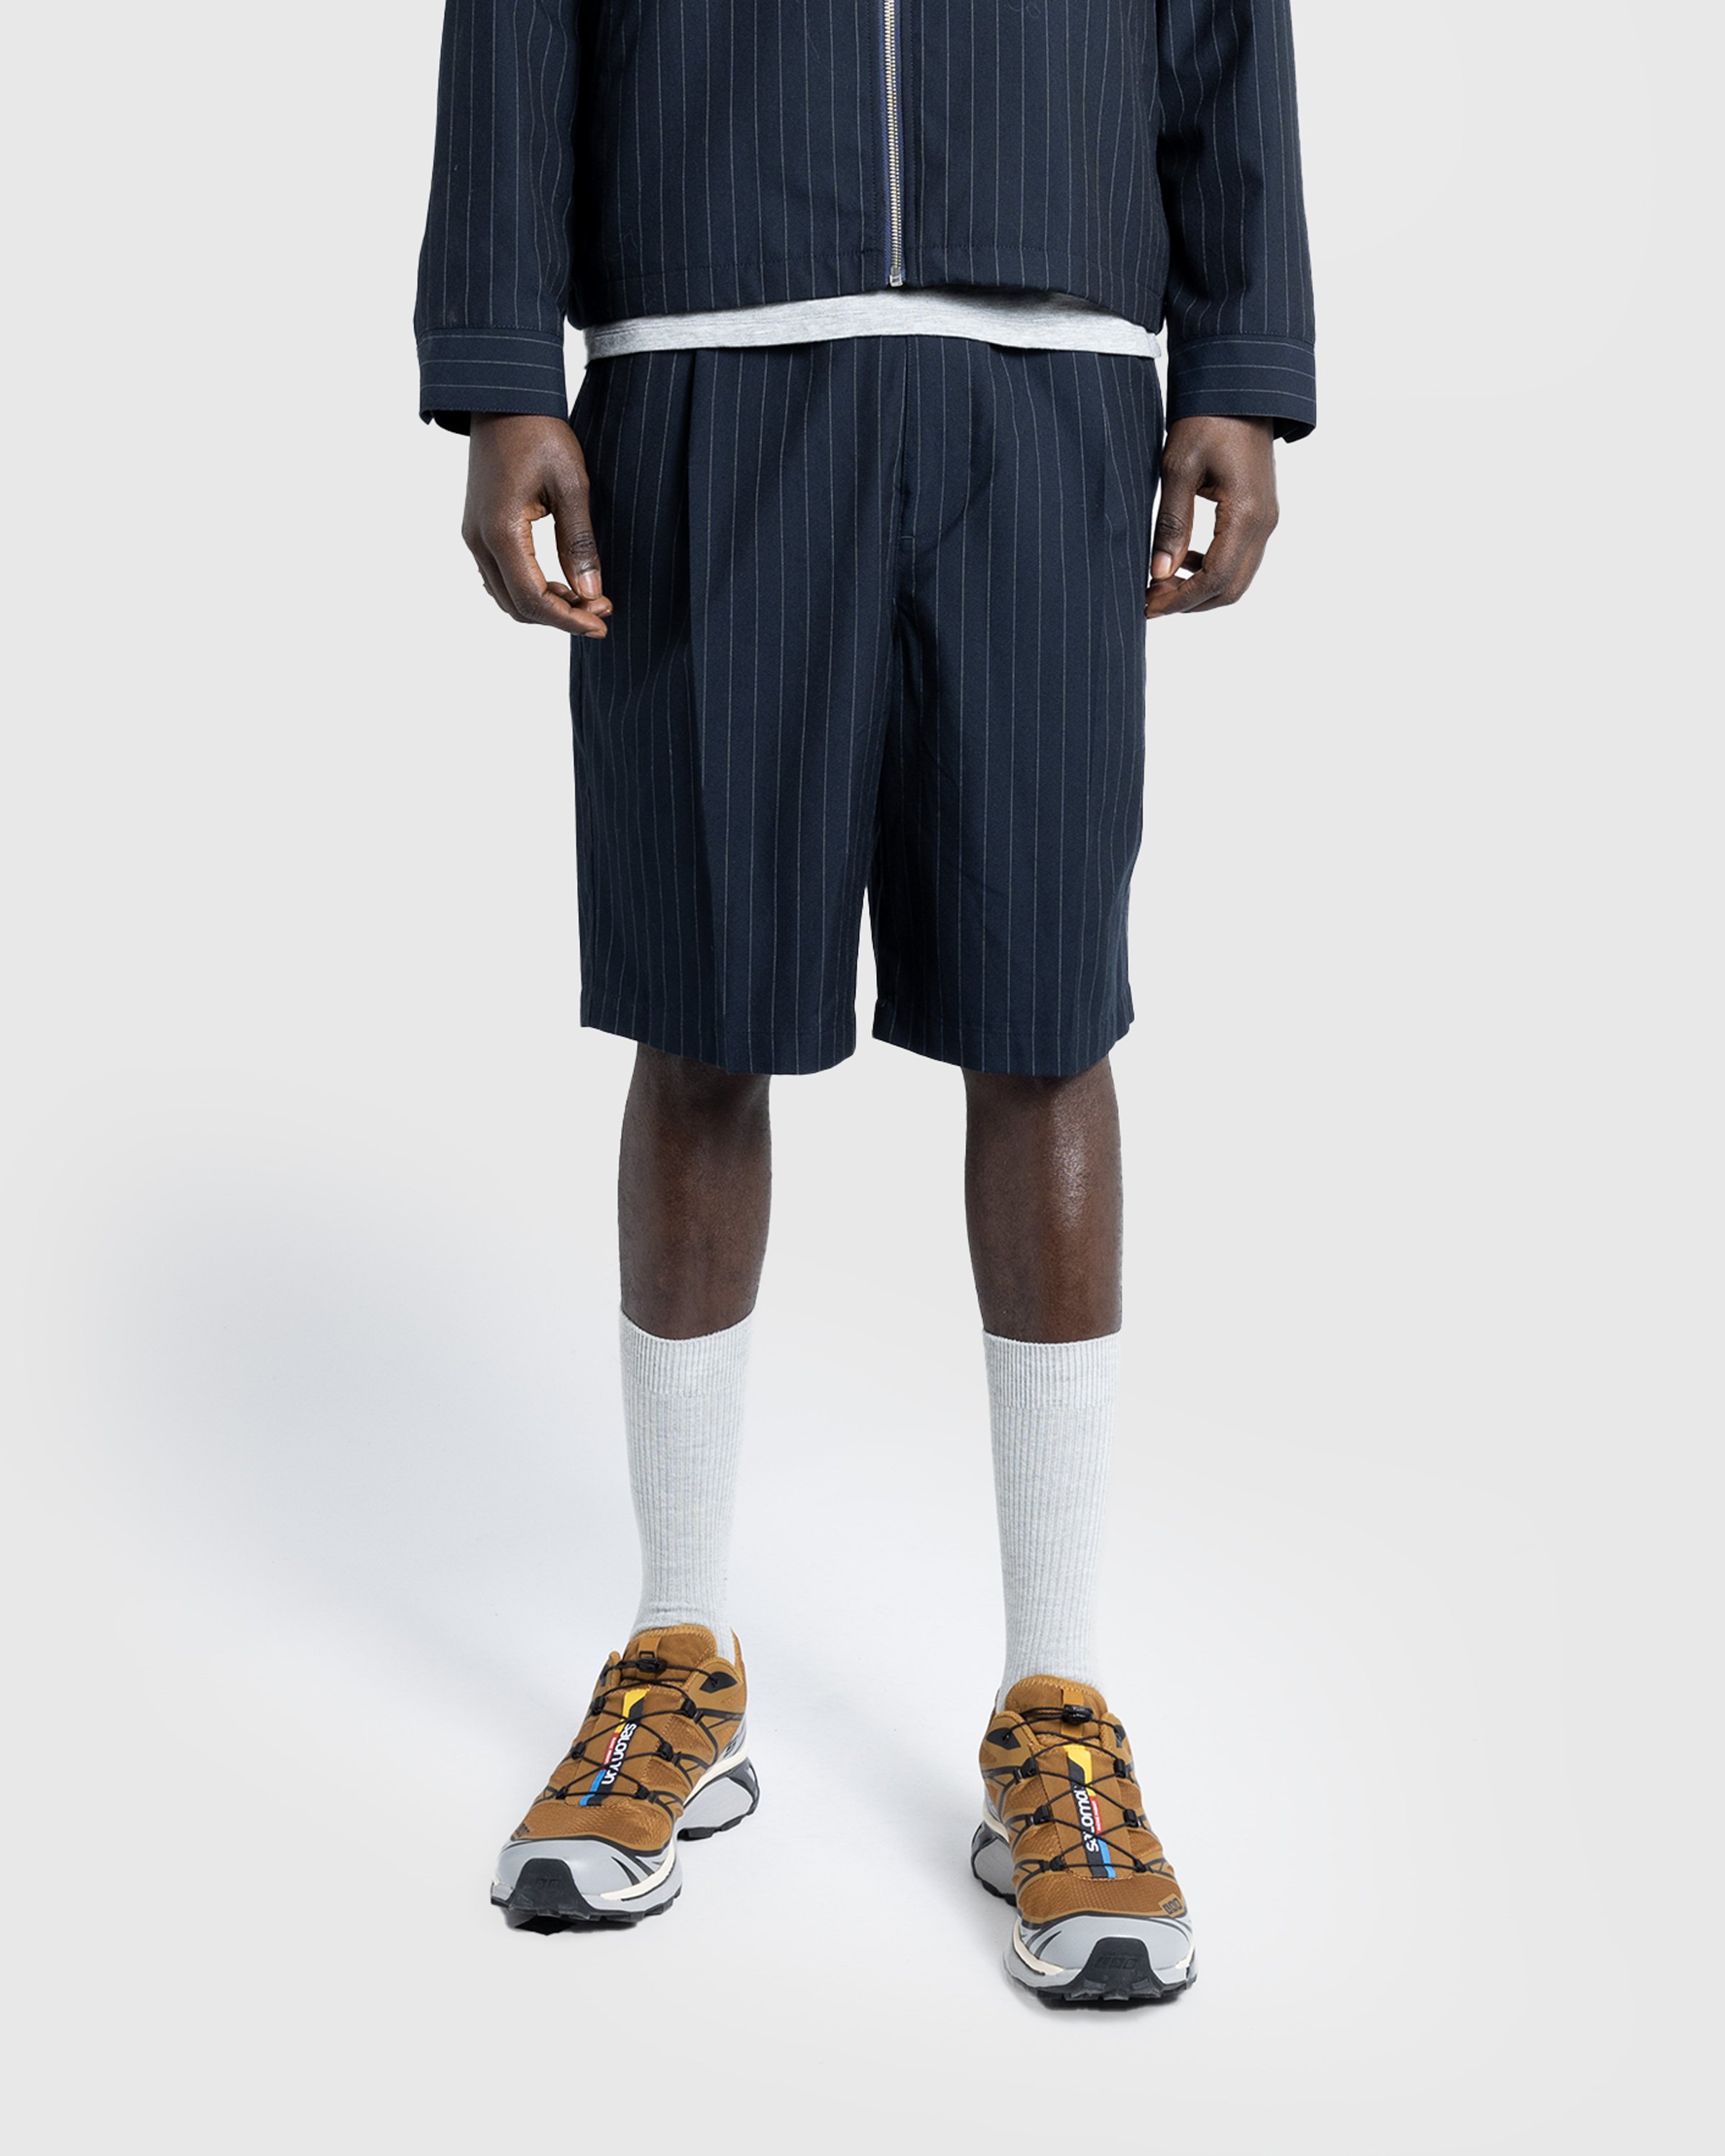 Highsnobiety HS05 - Tropical Suiting Shorts Stripes Navy - Clothing - Stripes Navy - Image 3